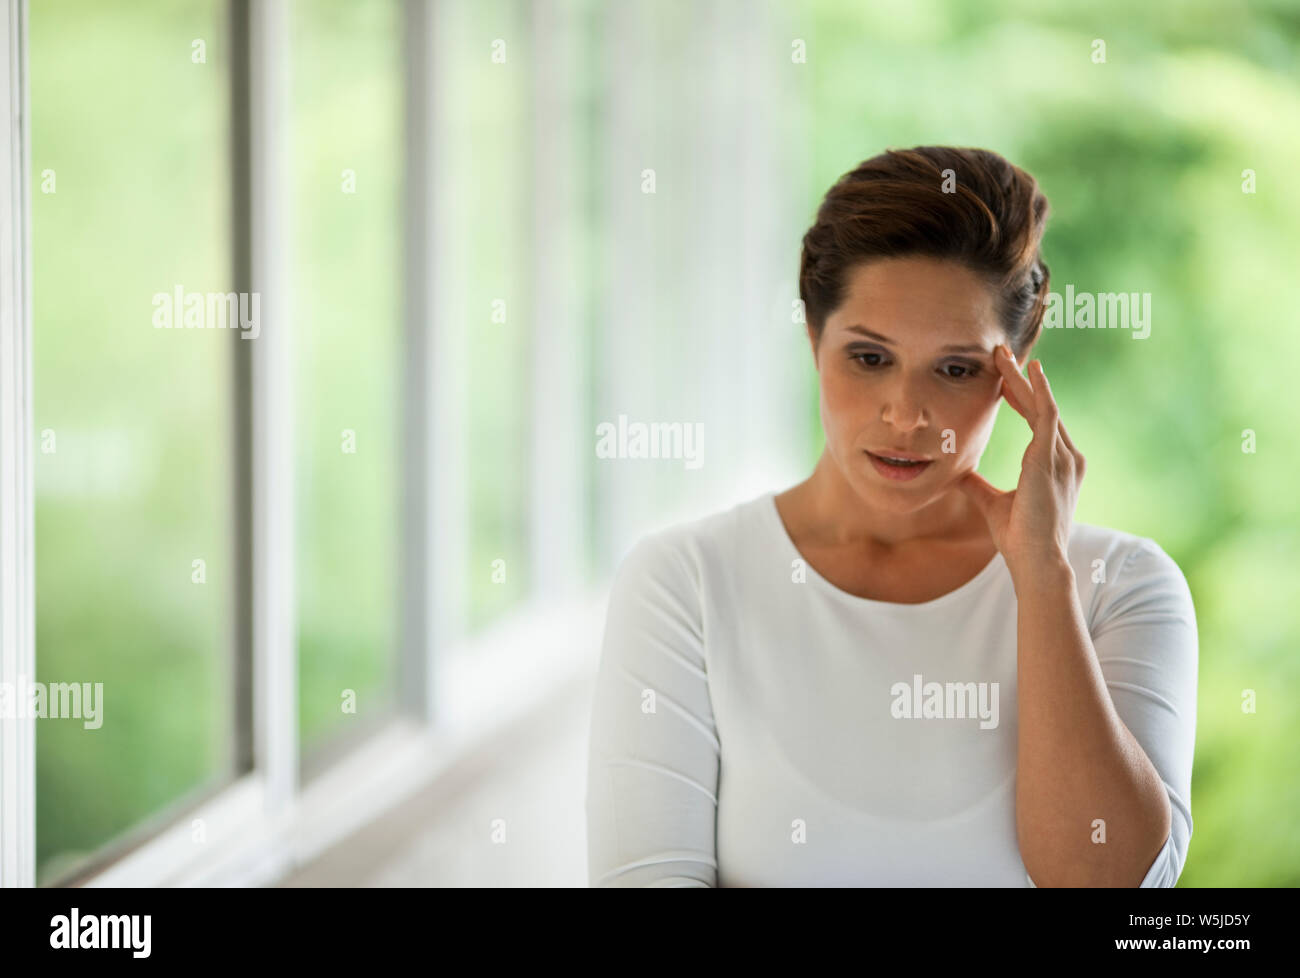 Portrait of mid adult woman looking worried. Stock Photo